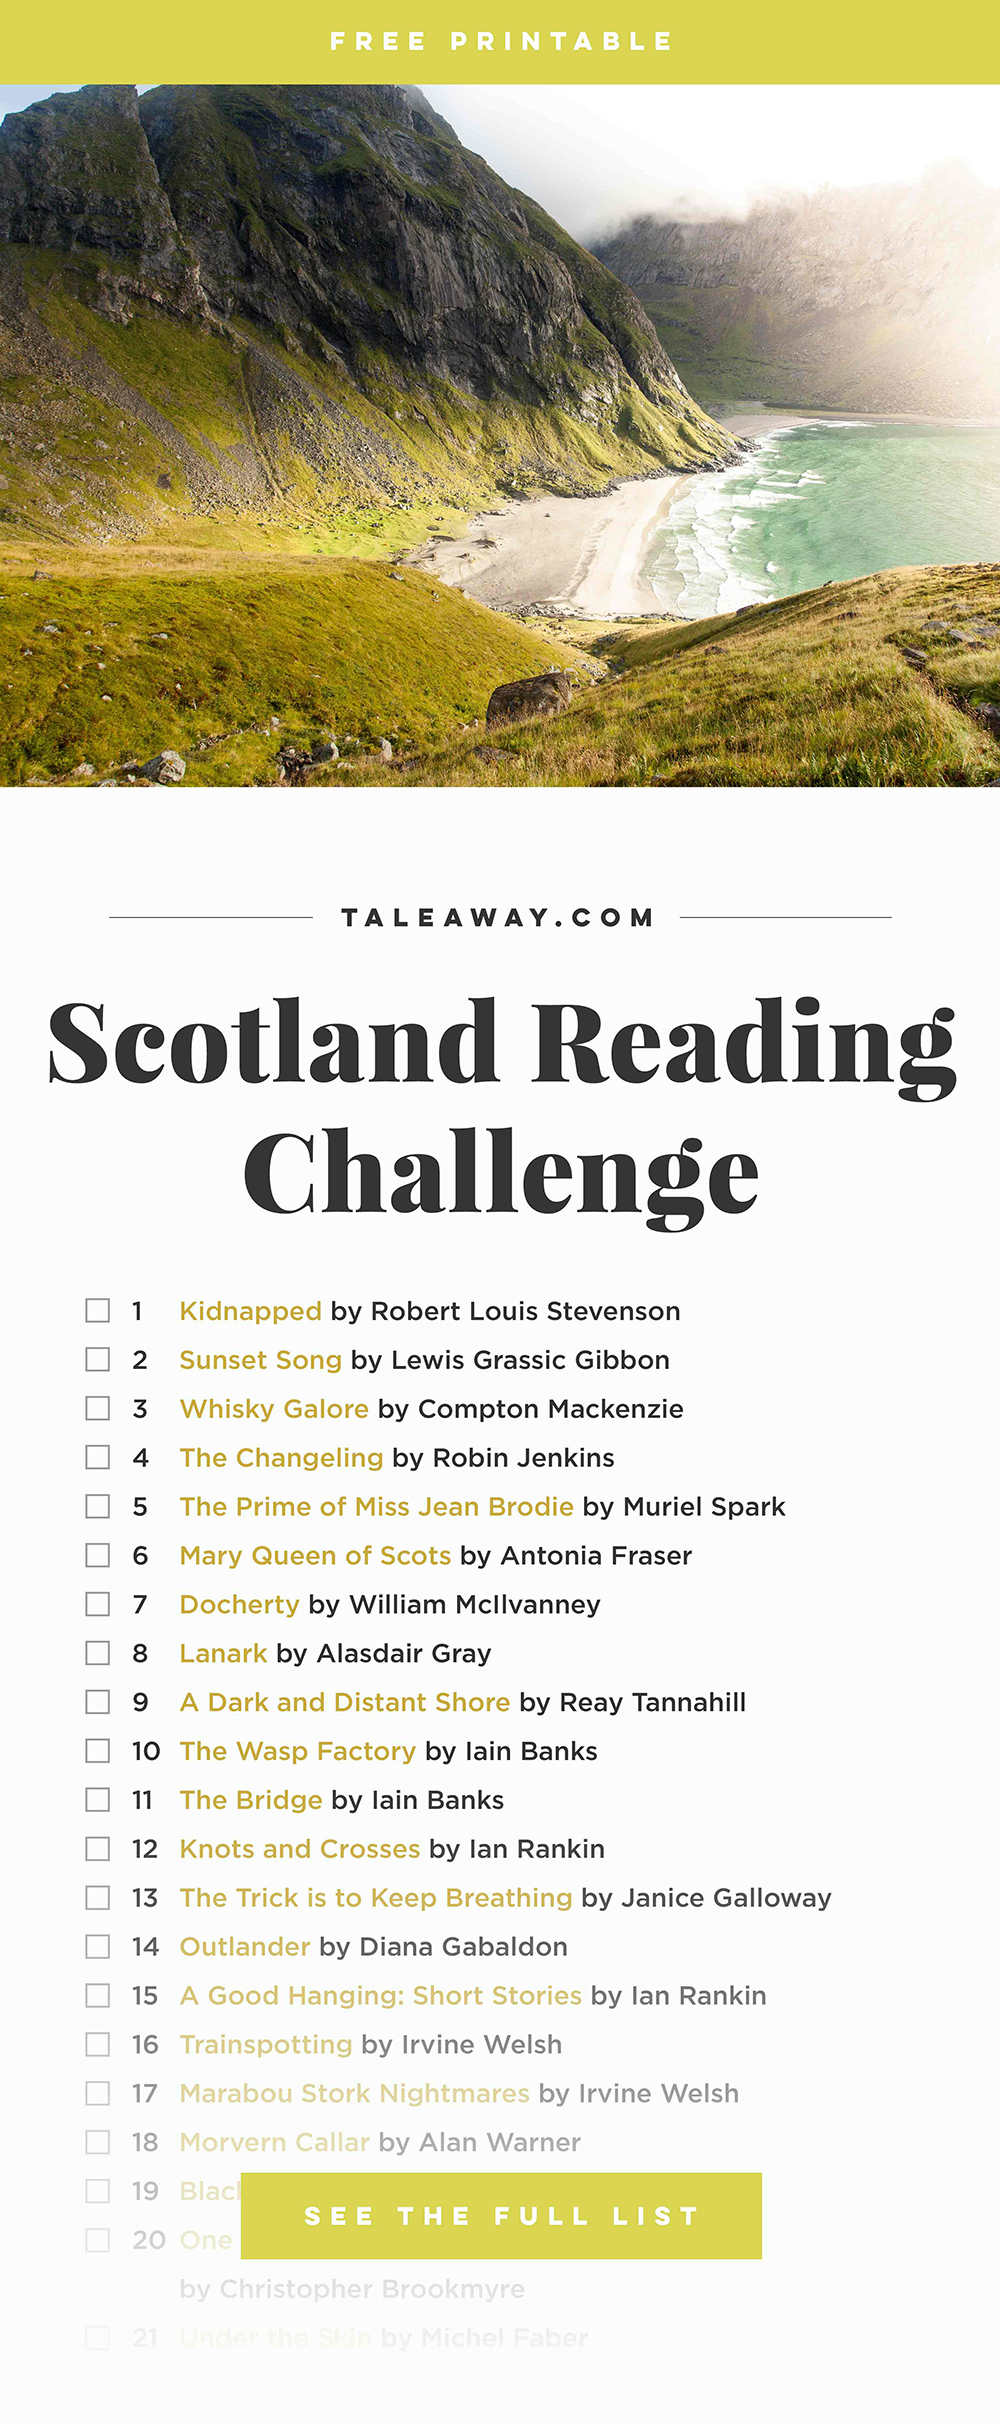 Scotland Reading Challenge, Books Set In Scotland - For more books visit www.taleway.com to find books set around the world. reading challenge, scottish books, book challenge, books you must read, books from around the world, world books, books and travel, travel reading list, reading list, books around the world, books to read, scotland books, scotland books novels, scotland travel